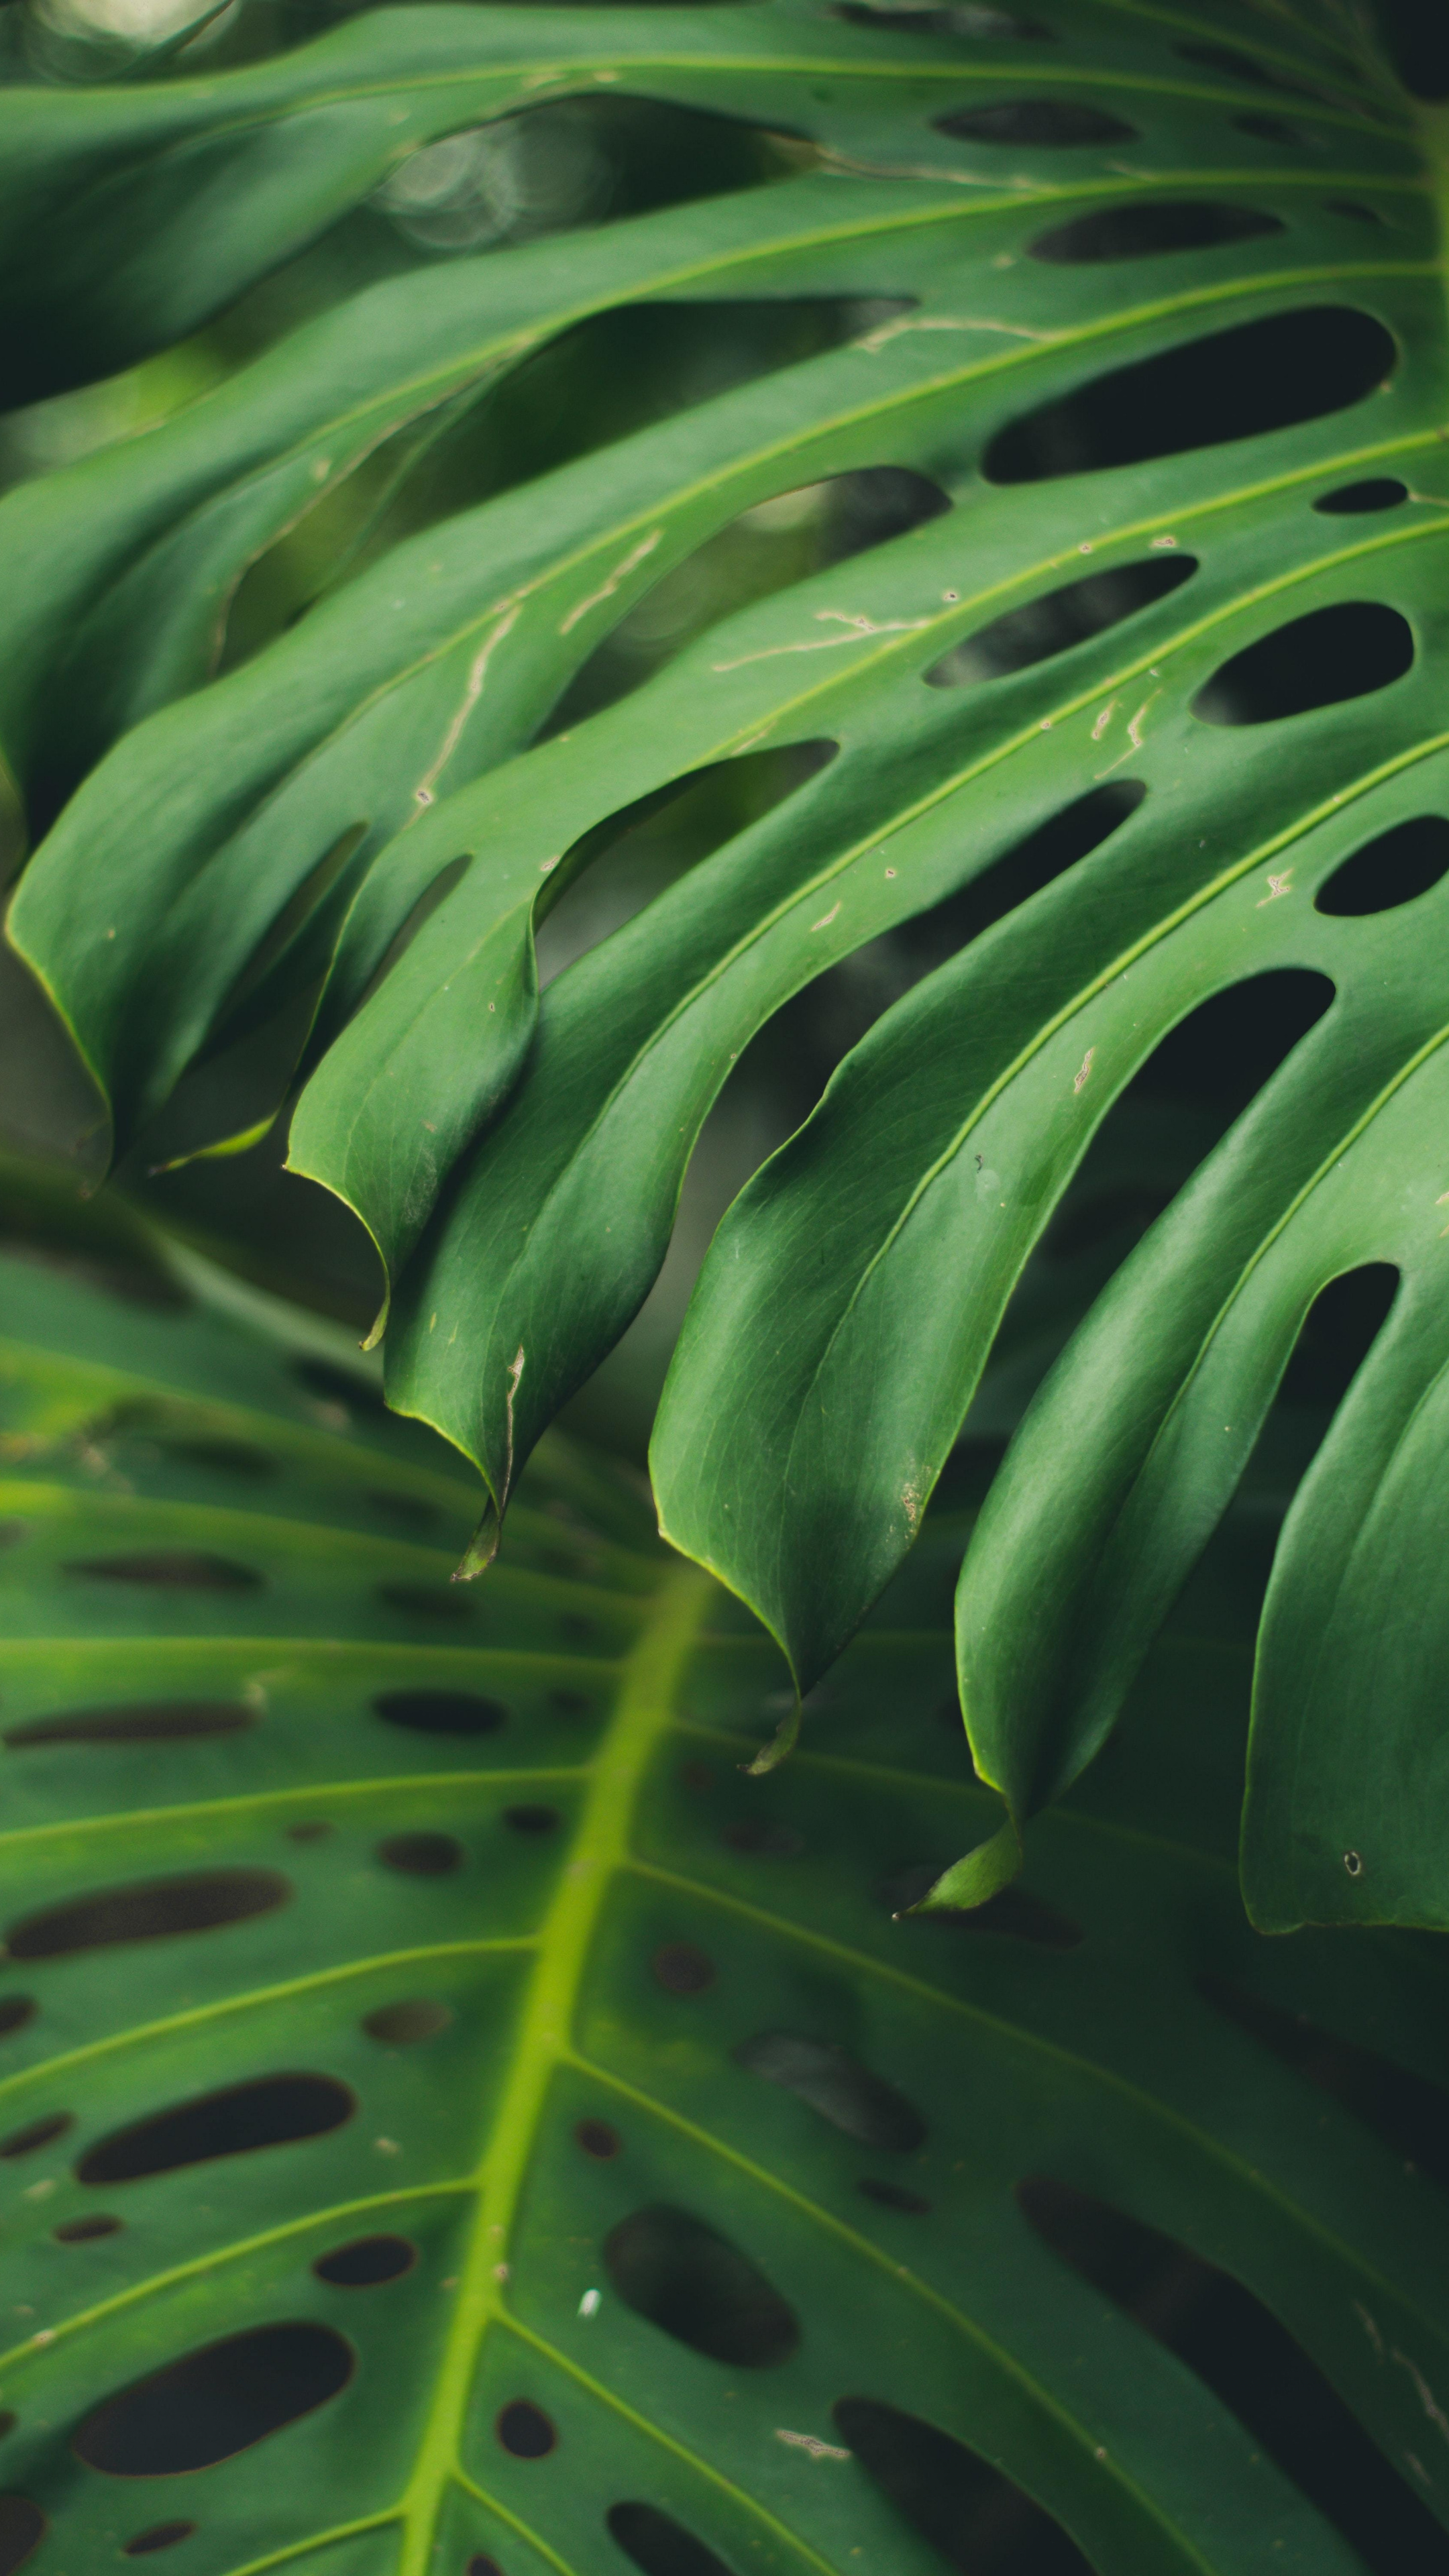 Green Leaf: Monstera deliciosa, The Swiss cheese plant, The split-leaf philodendron, The flowering plant. 2160x3840 4K Wallpaper.